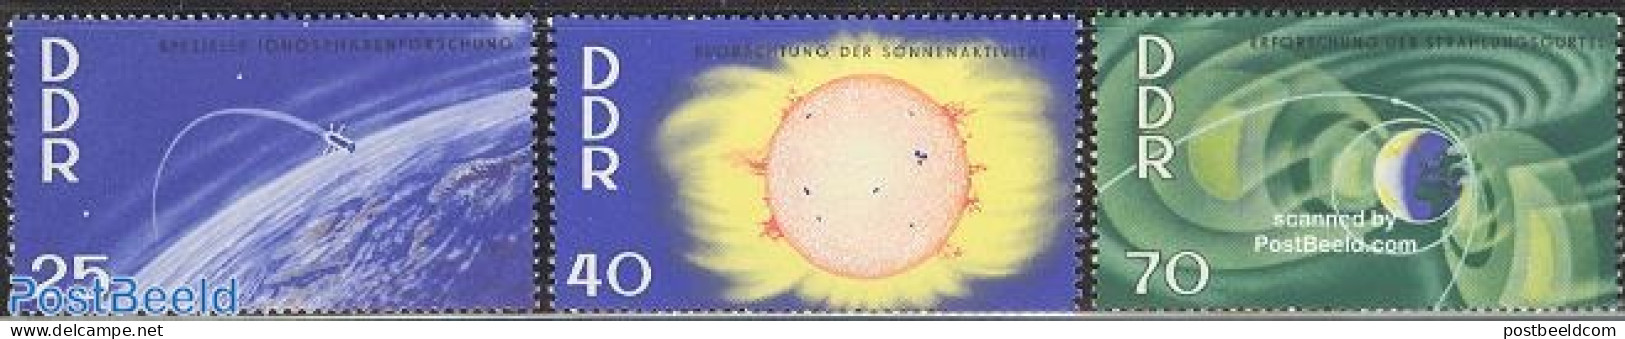 Germany, DDR 1964 QUIET SUN YEAR 3V, Mint NH, Science - Astronomy - Unused Stamps